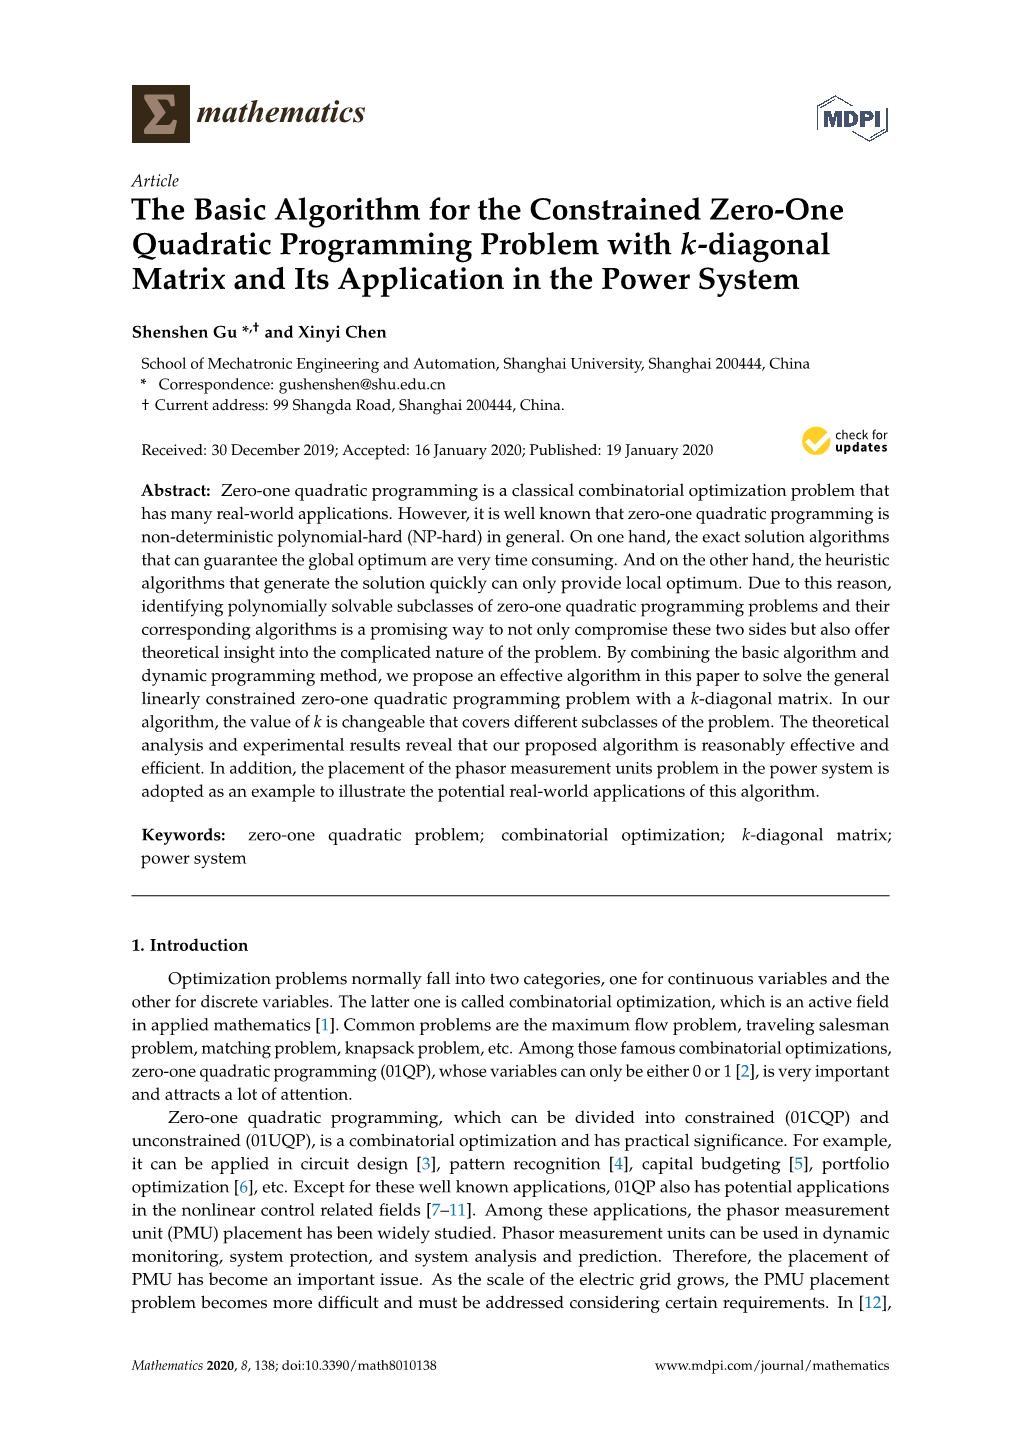 The Basic Algorithm for the Constrained Zero-One Quadratic Programming Problem with K-Diagonal Matrix and Its Application in the Power System